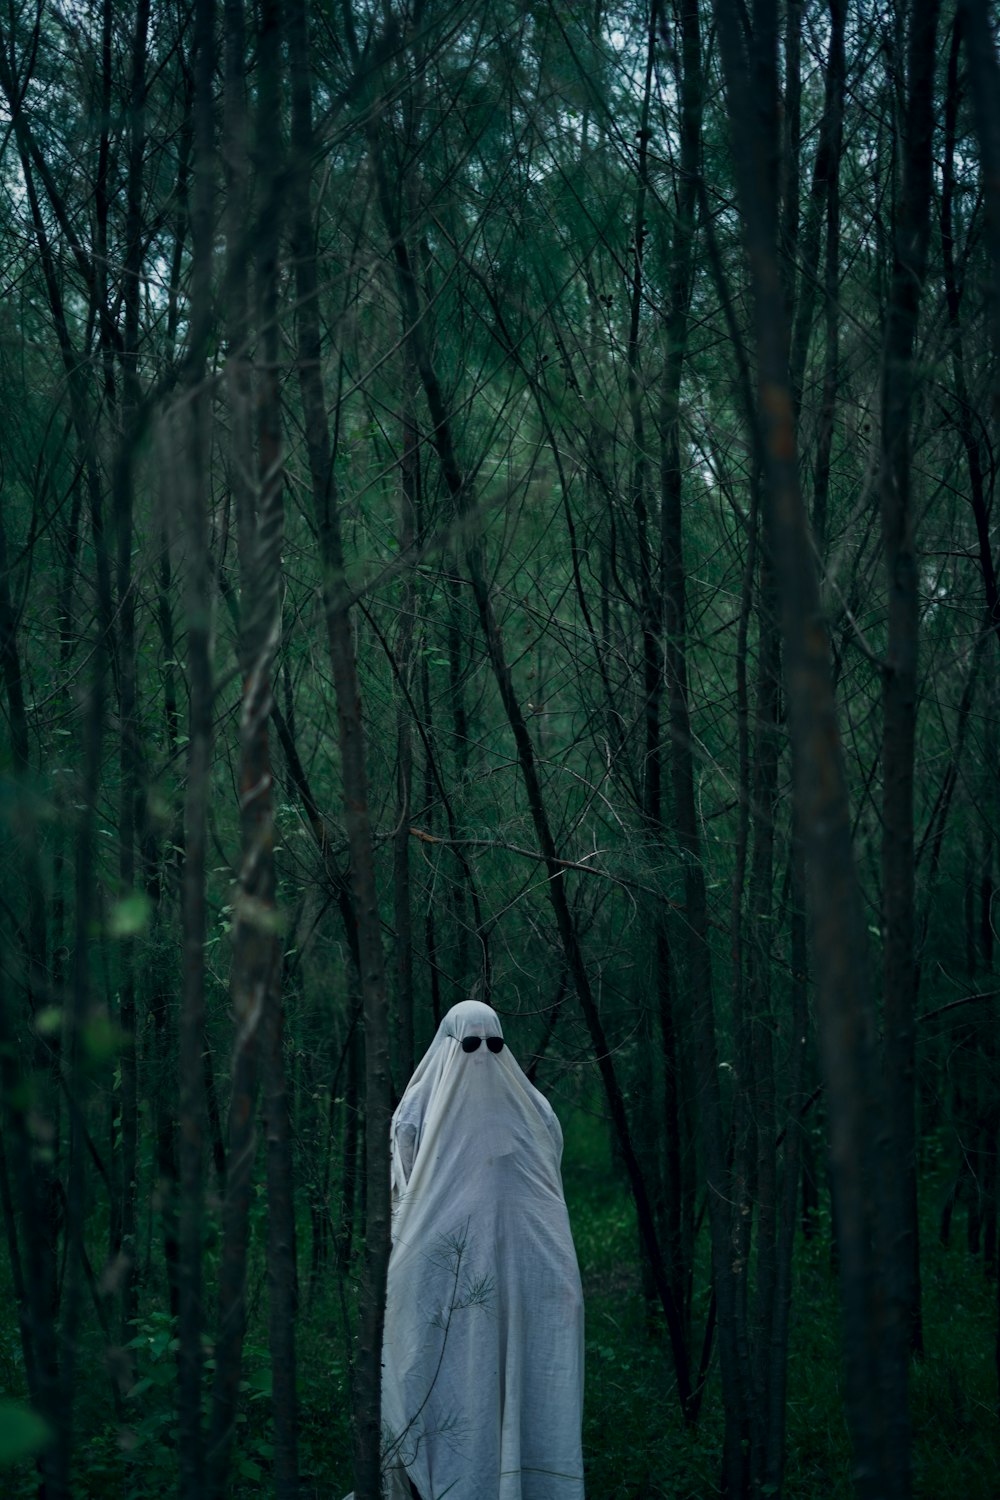 a ghostly person in a white cloak in a forest